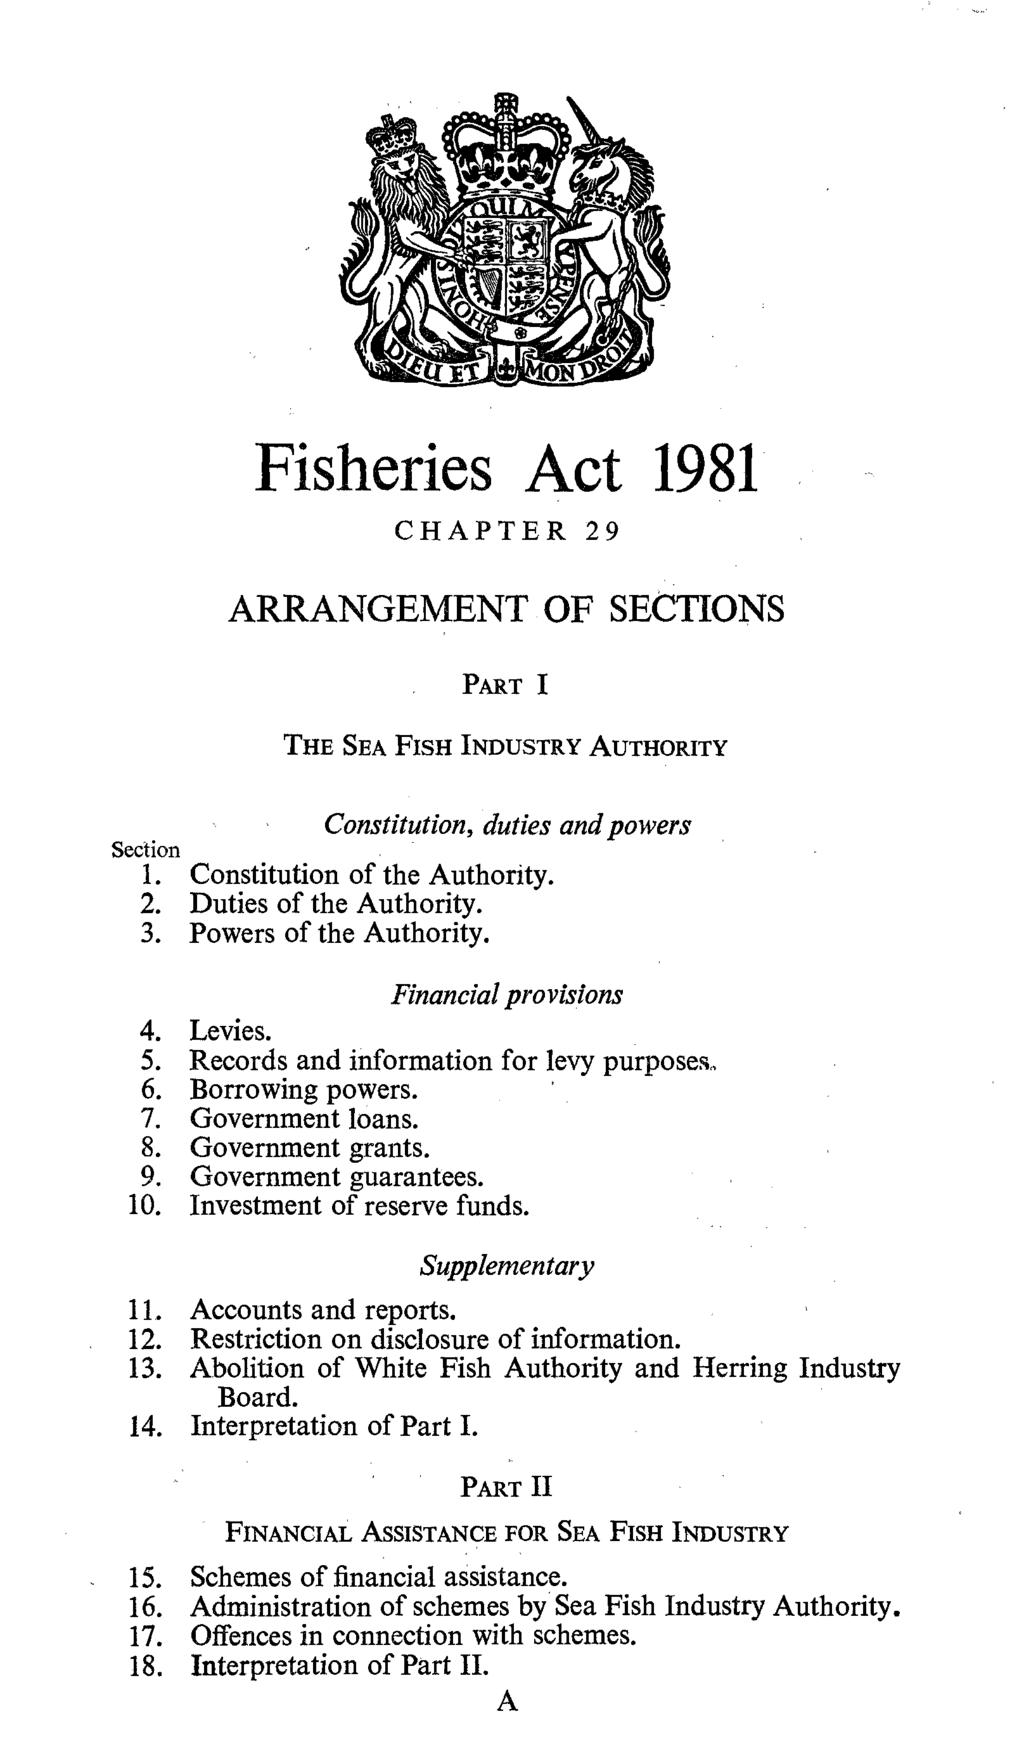 Fisheries Act 1981 CHAPTER 29 ARRANGEMENT OF SECTIONS PART I THE SEA FISH INDUSTRY AUTHORITY Constitution, duties and powers Section 1. Constitution of the Authority. 2. Duties of the Authority. 3.